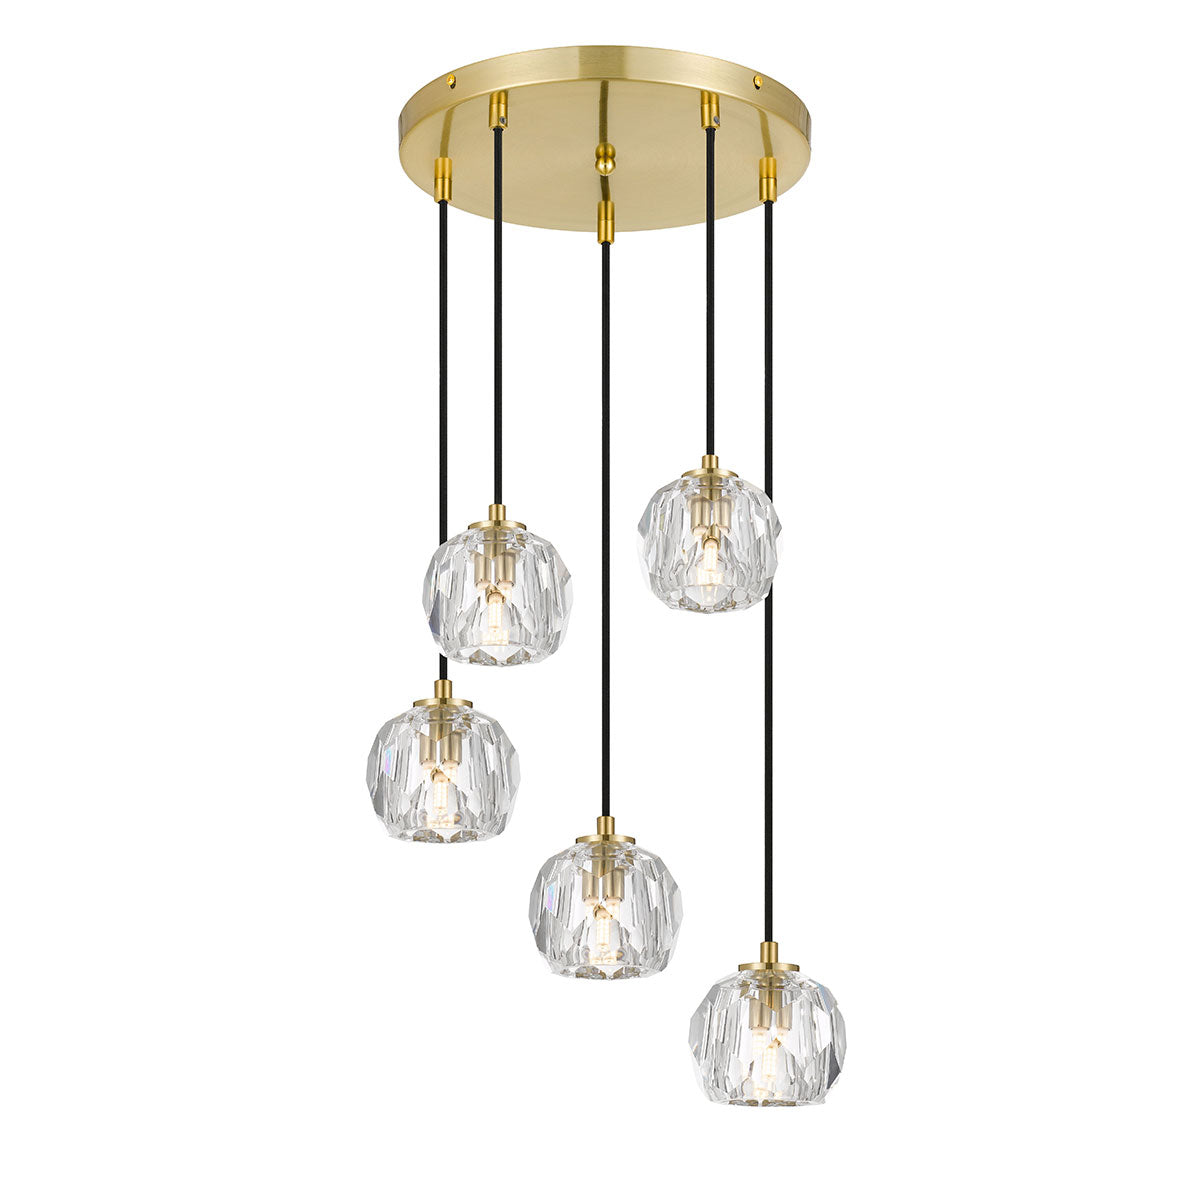 Zaha 5 Light Antique Gold with Crystal Pendant